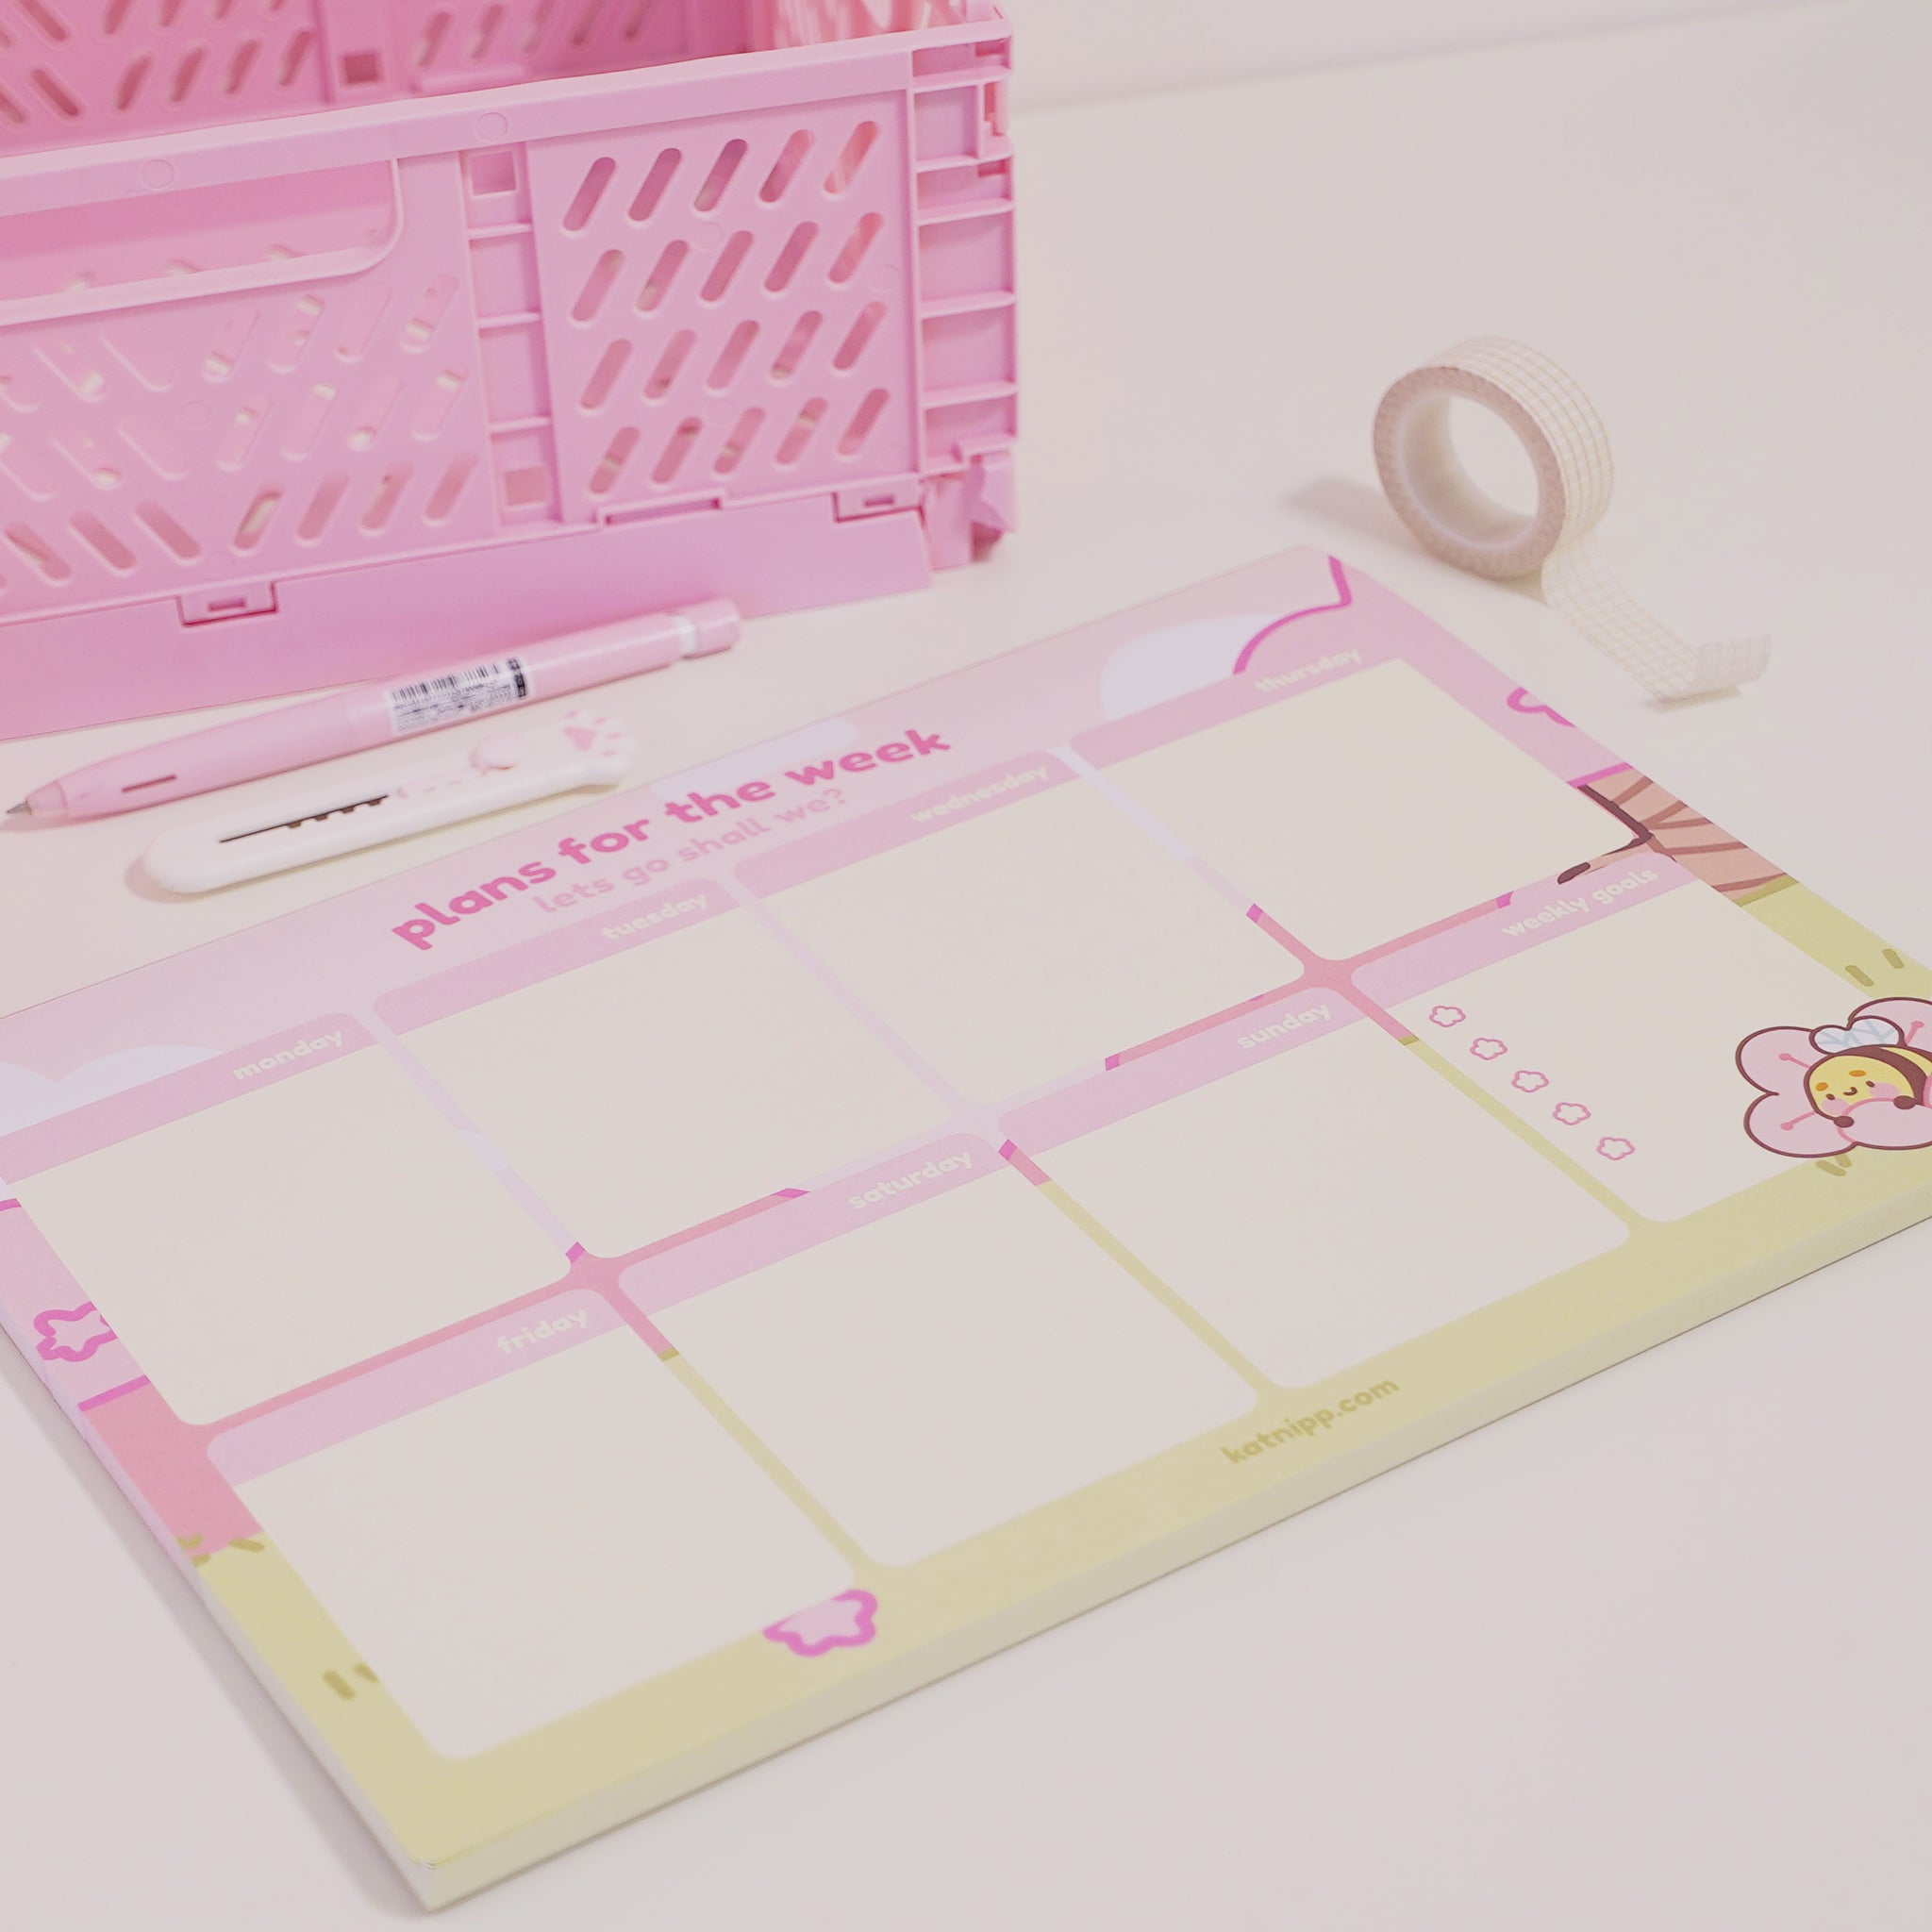 A4 Sakura-inspired desktop planner featuring Bumblebutt the Bumblebee charm and cherry blossom illustrations. Perfect for weekly planning, washi